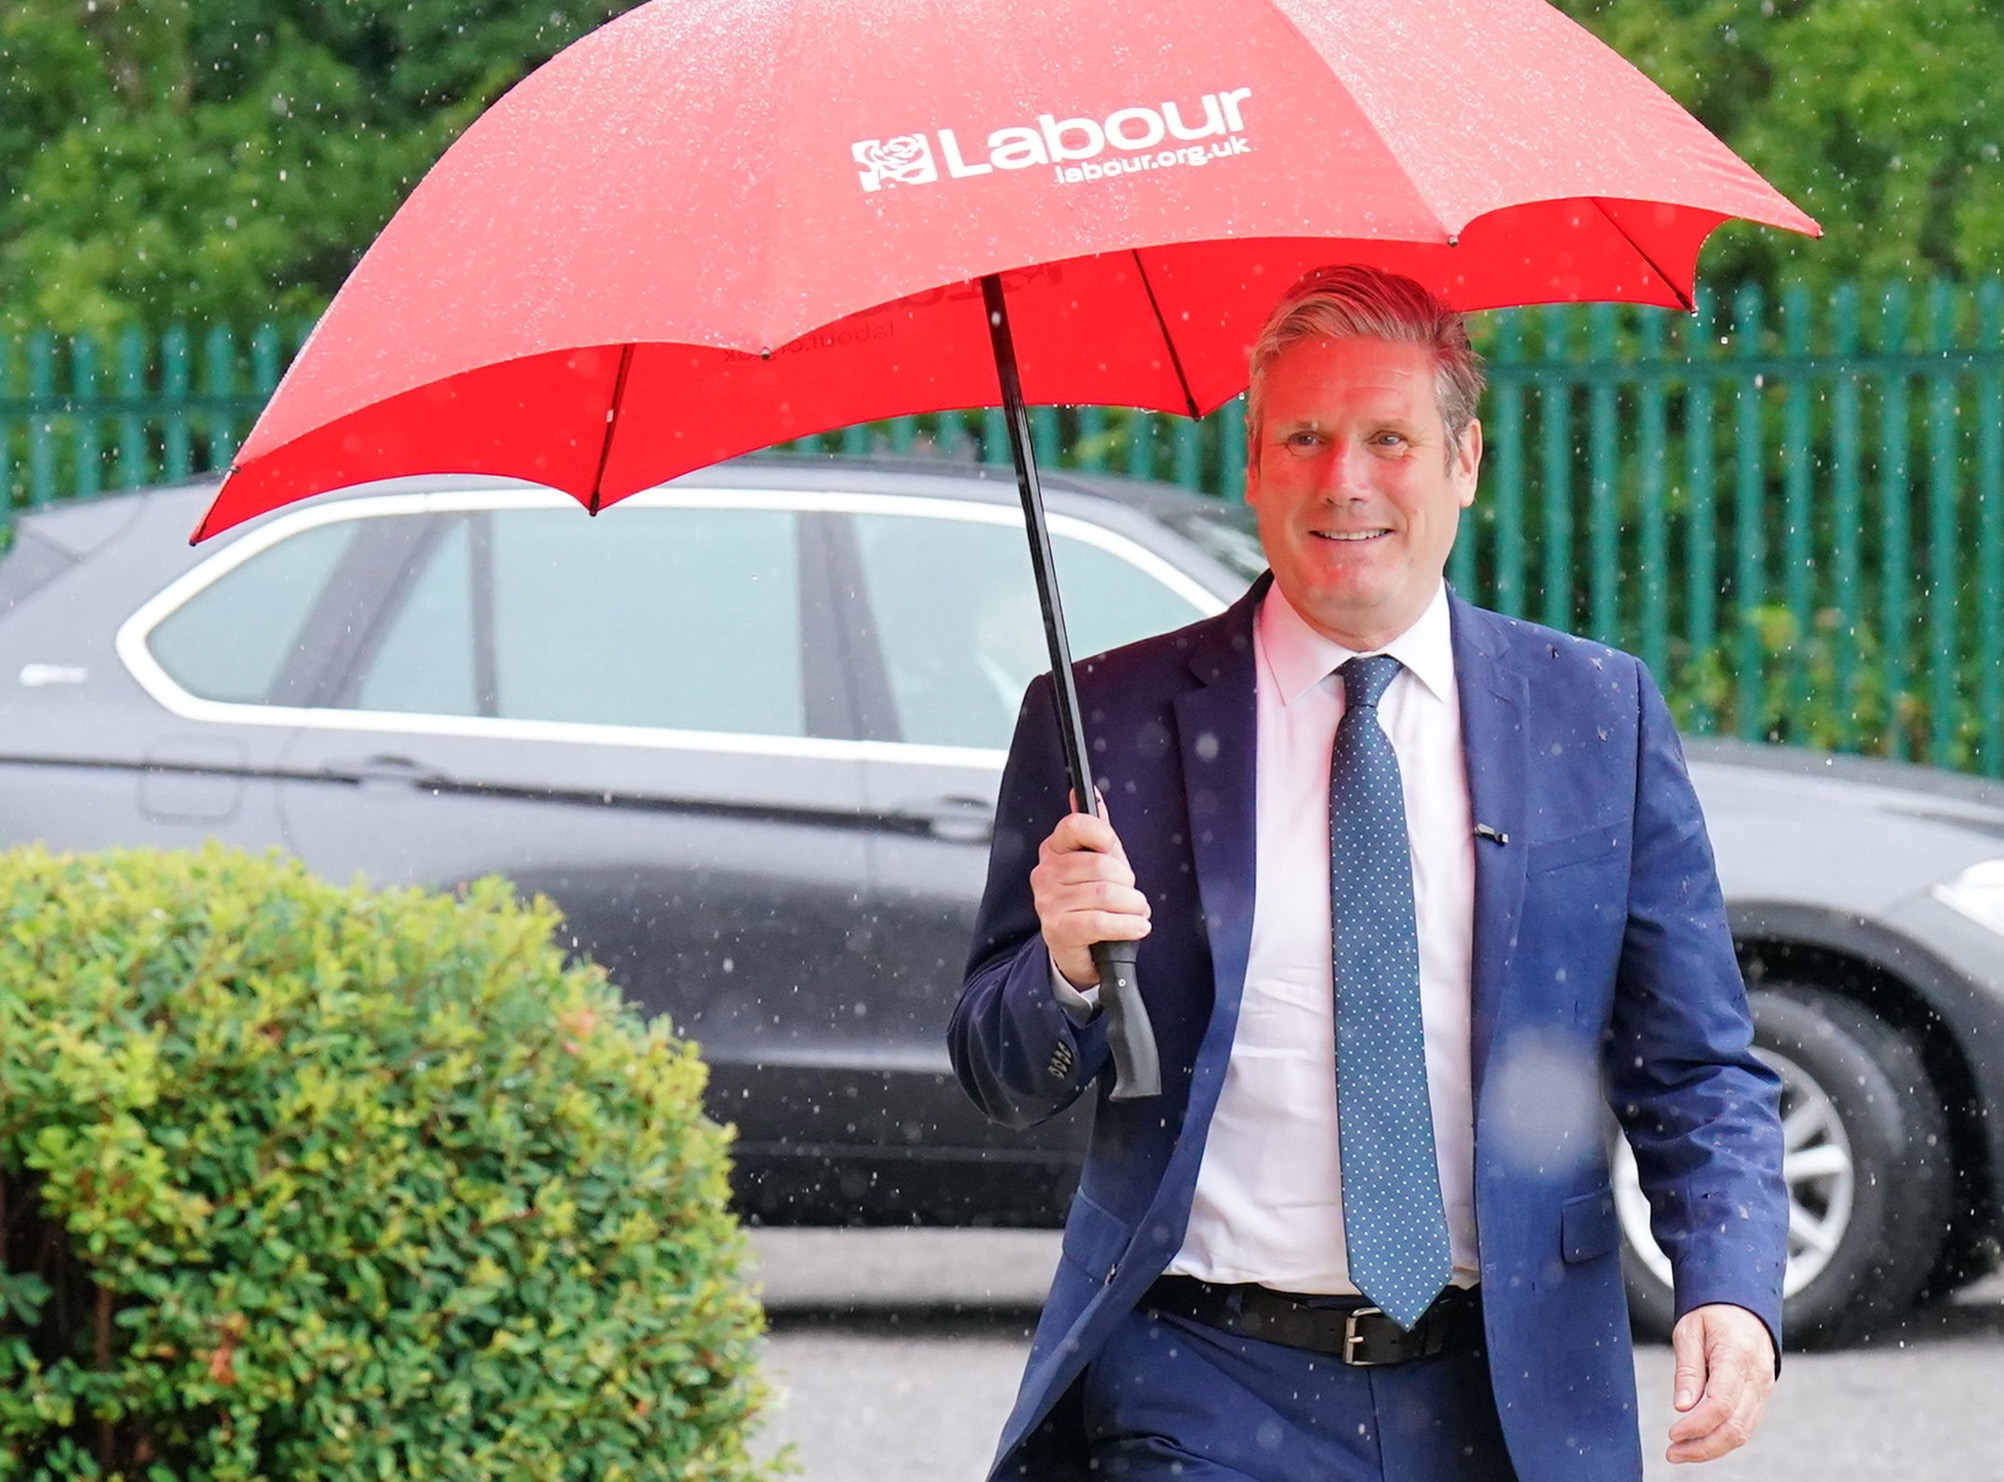 Labour shadow minister quits Starmer’s top team